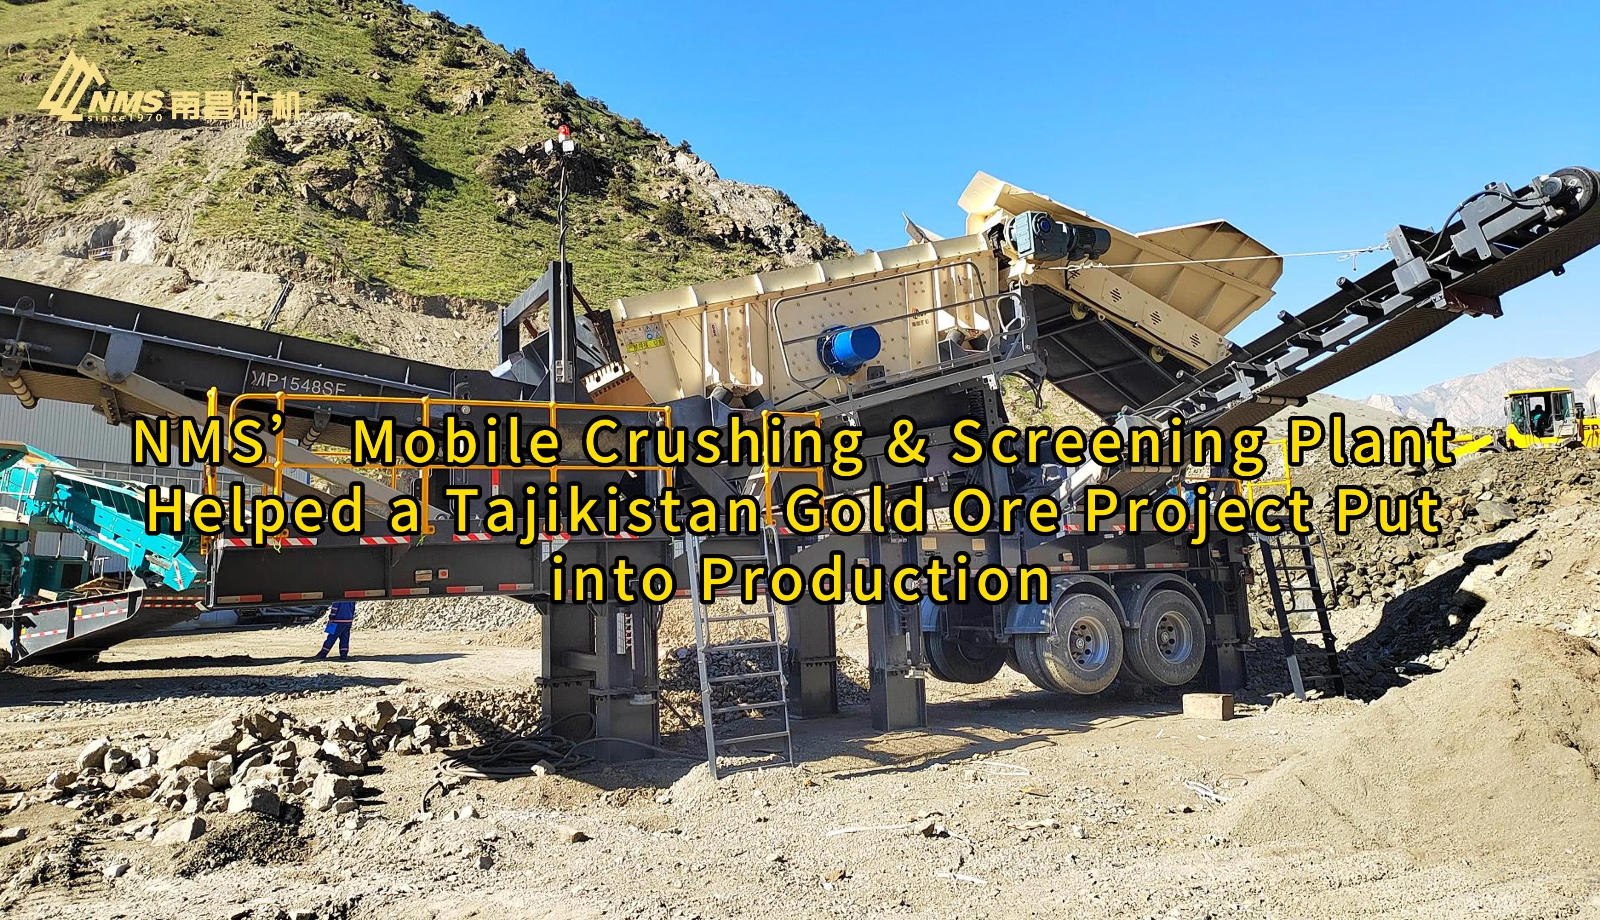 NMS’ Mobile Crushing & Screening Plant Helped a Tajikistan Gold Ore Project Put into Production